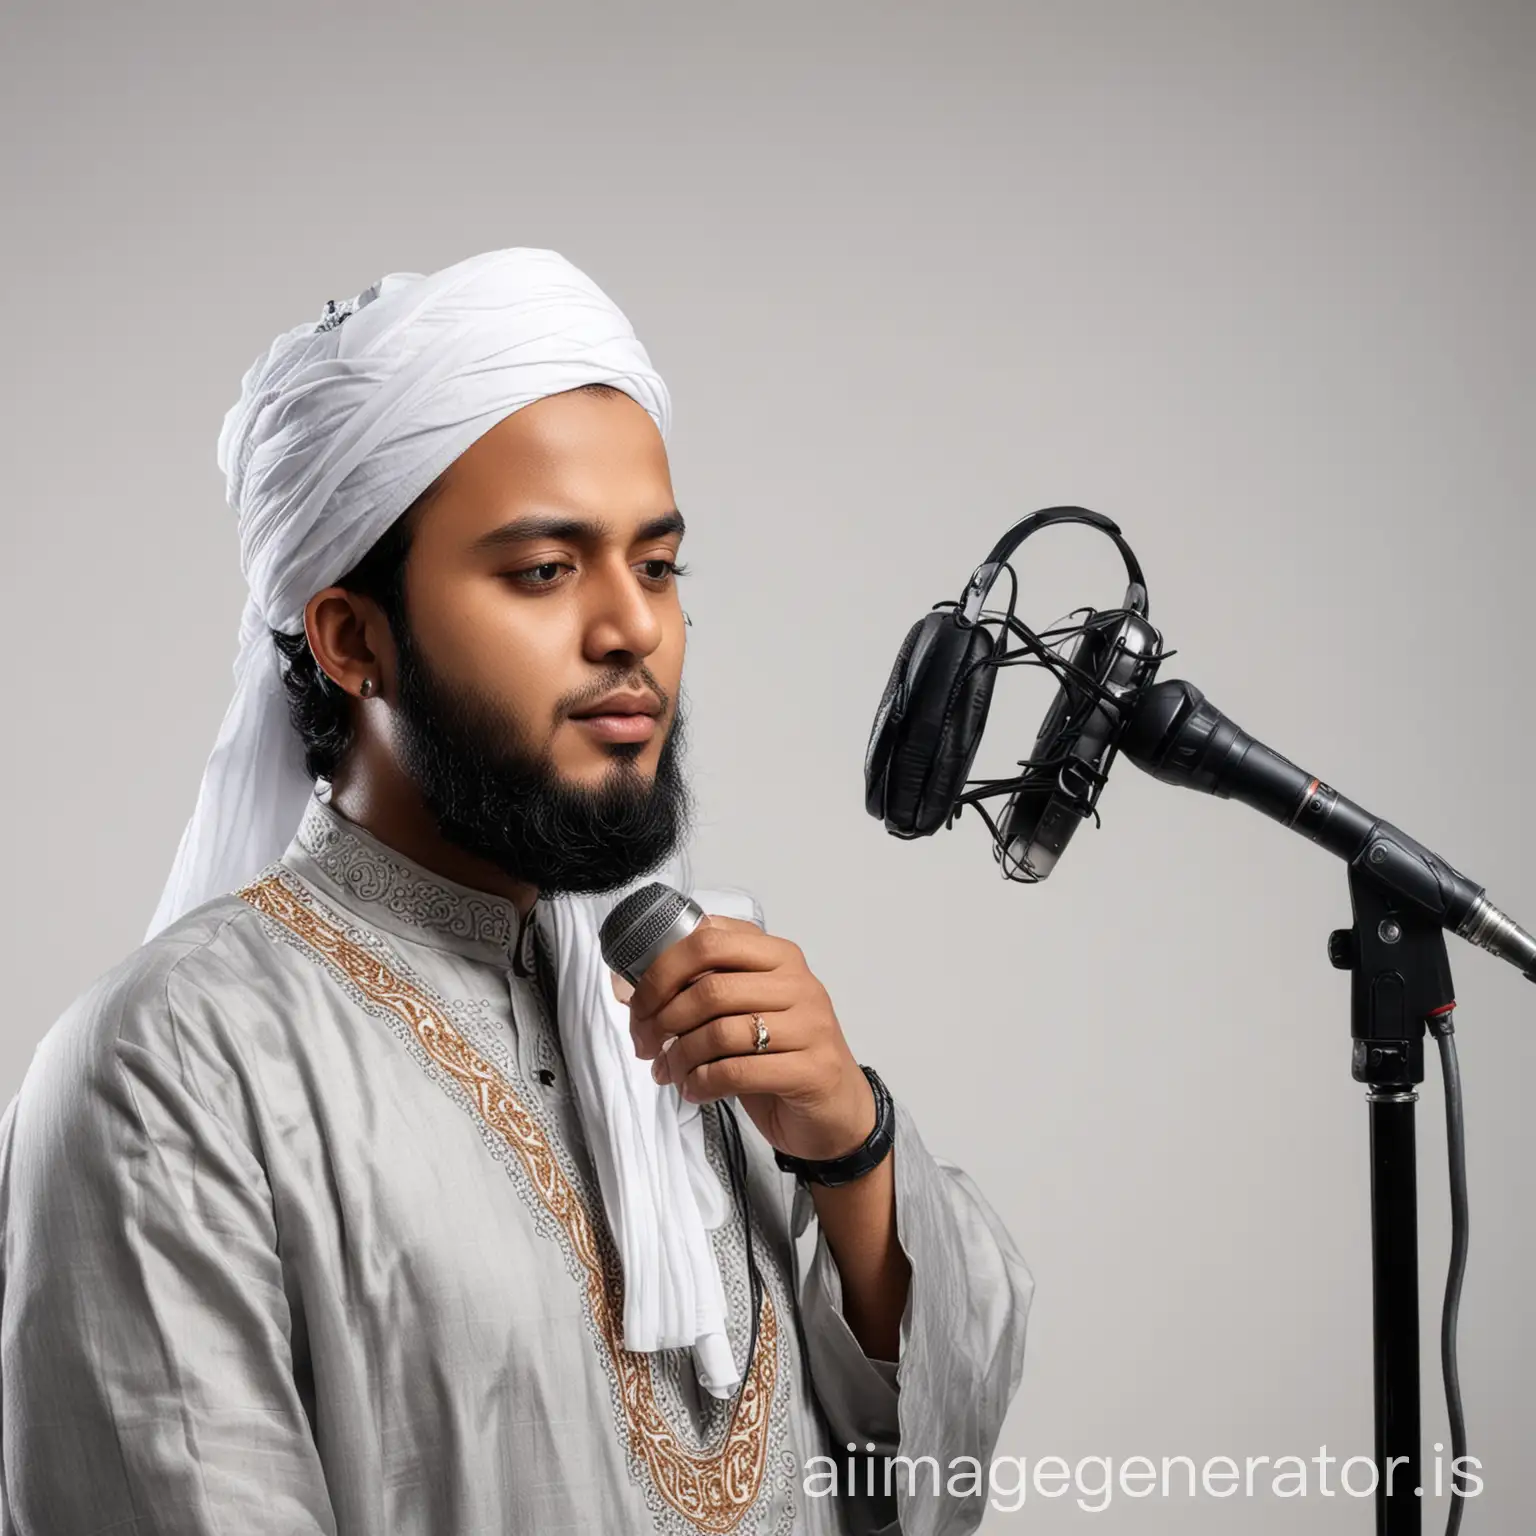 A Bangladeshi muslim singer recording his song in white background wearing a beautiful jubba. Headphone in his head and in front of a condenser microphone